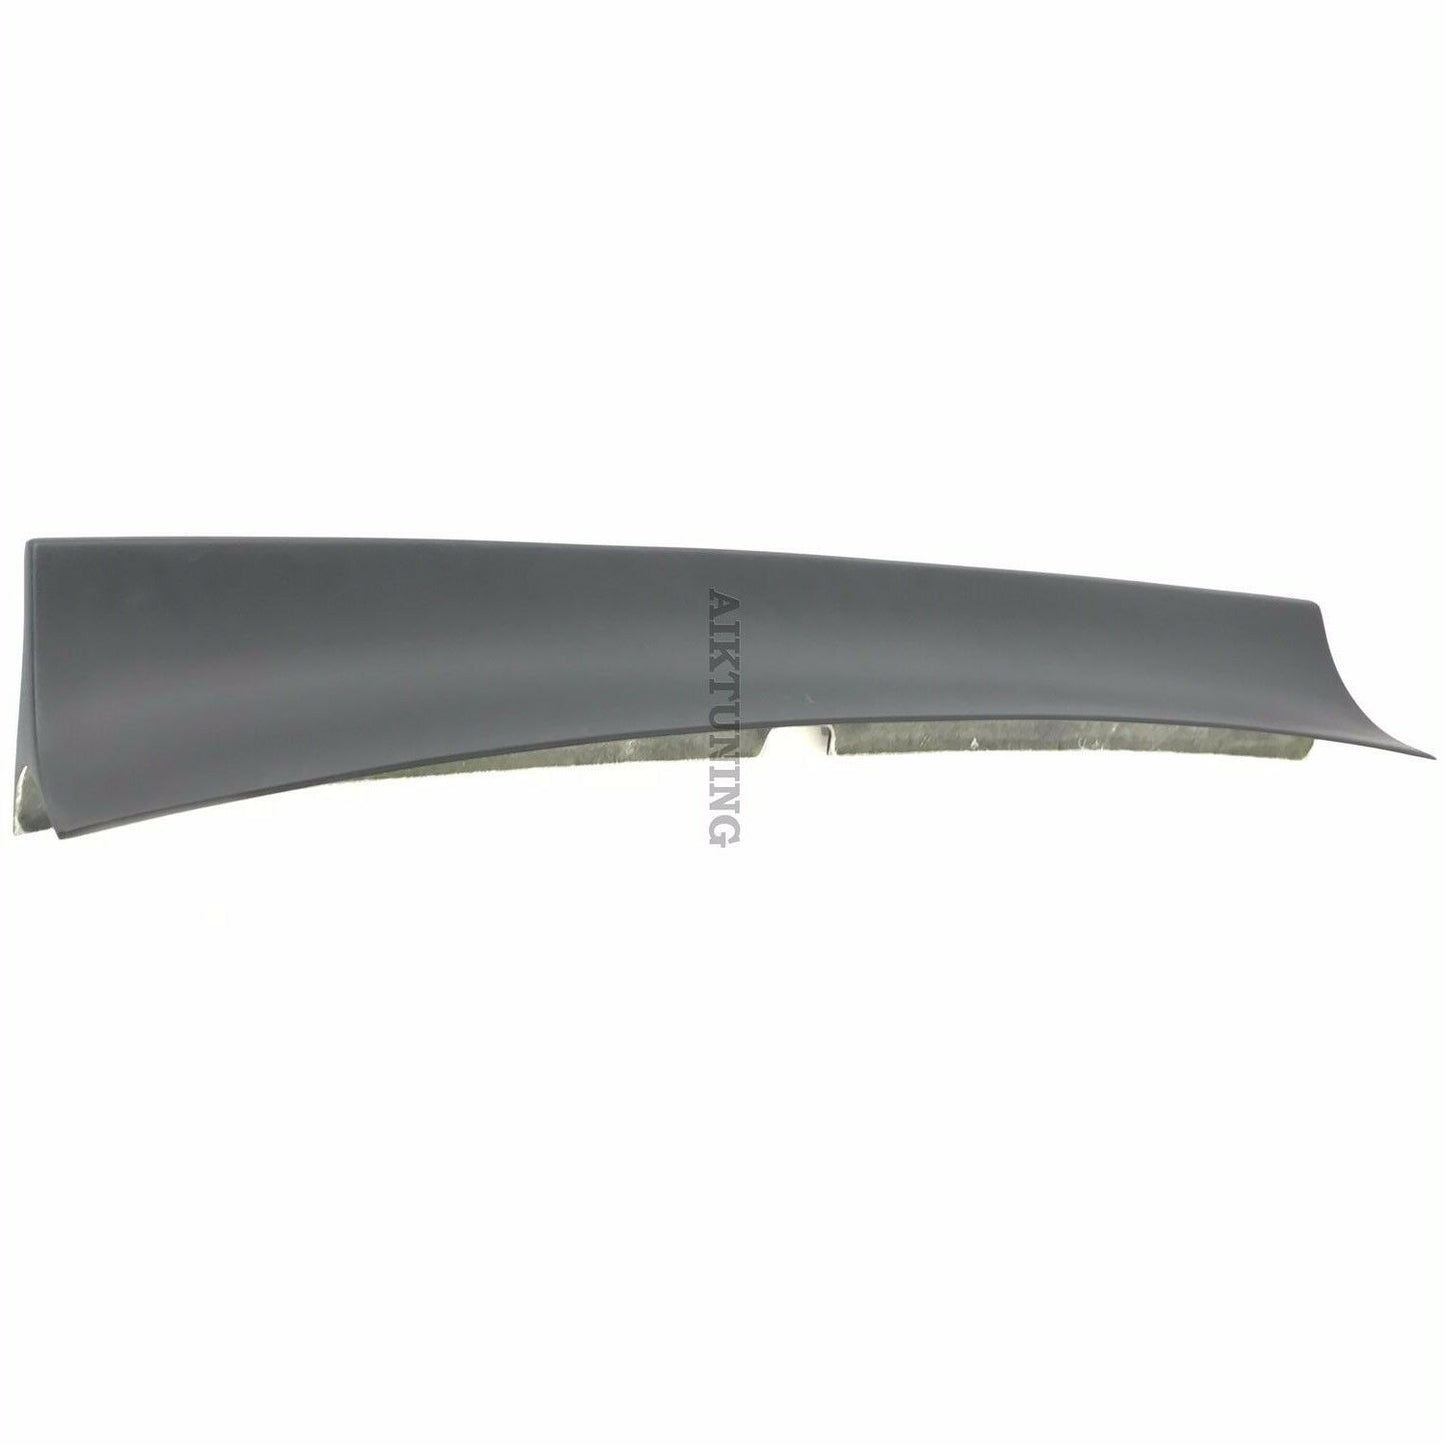 Rear JDM Boot Trunk Ducktail Spoiler Wing (Fits Honda Civic MK5 5th Gen Coupe)